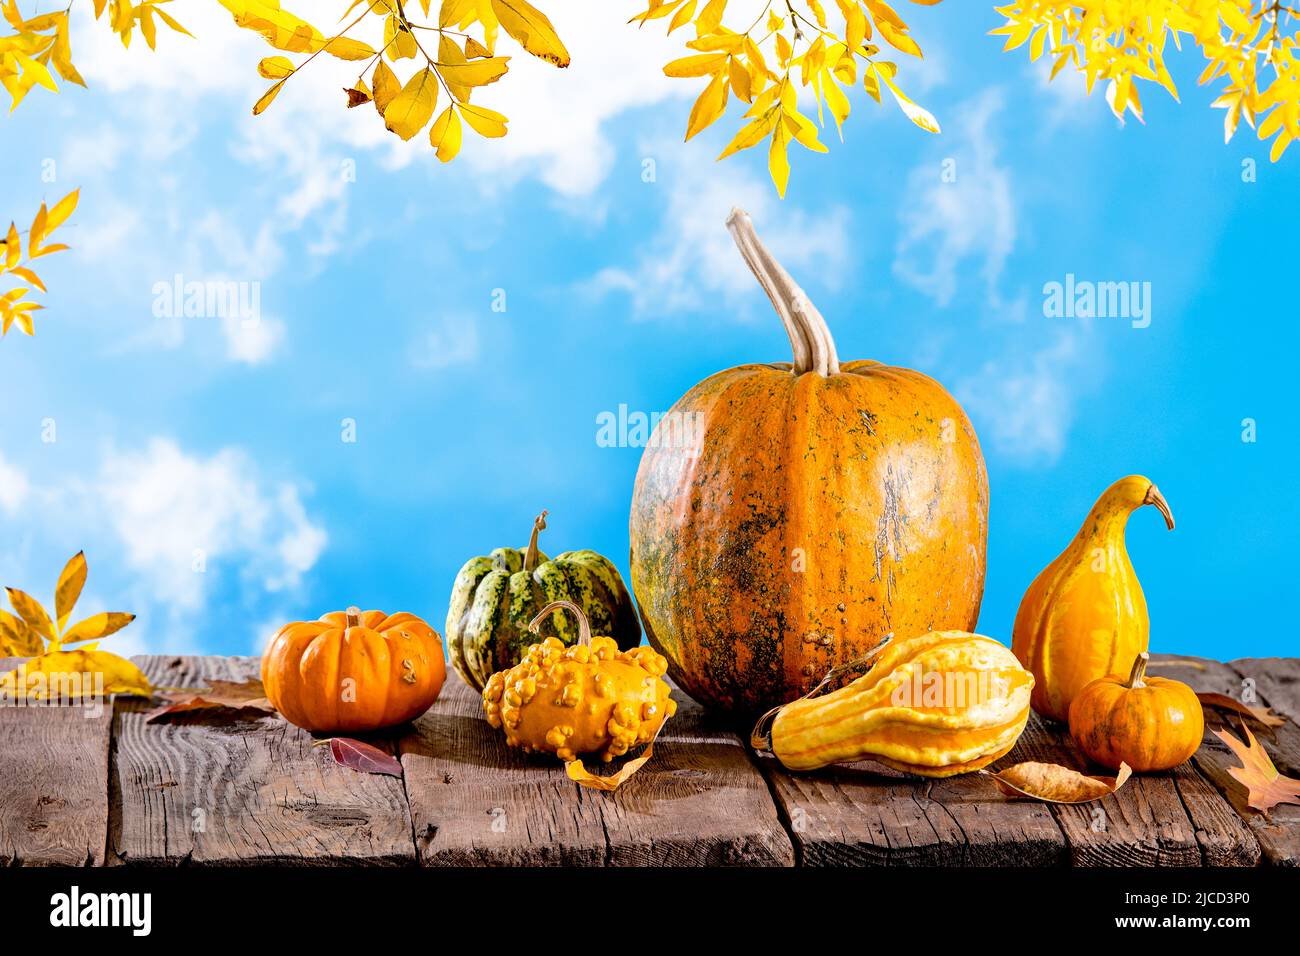 Autumn frame with pumpkins on wooden table and orange leaves against blue sky Stock Photo